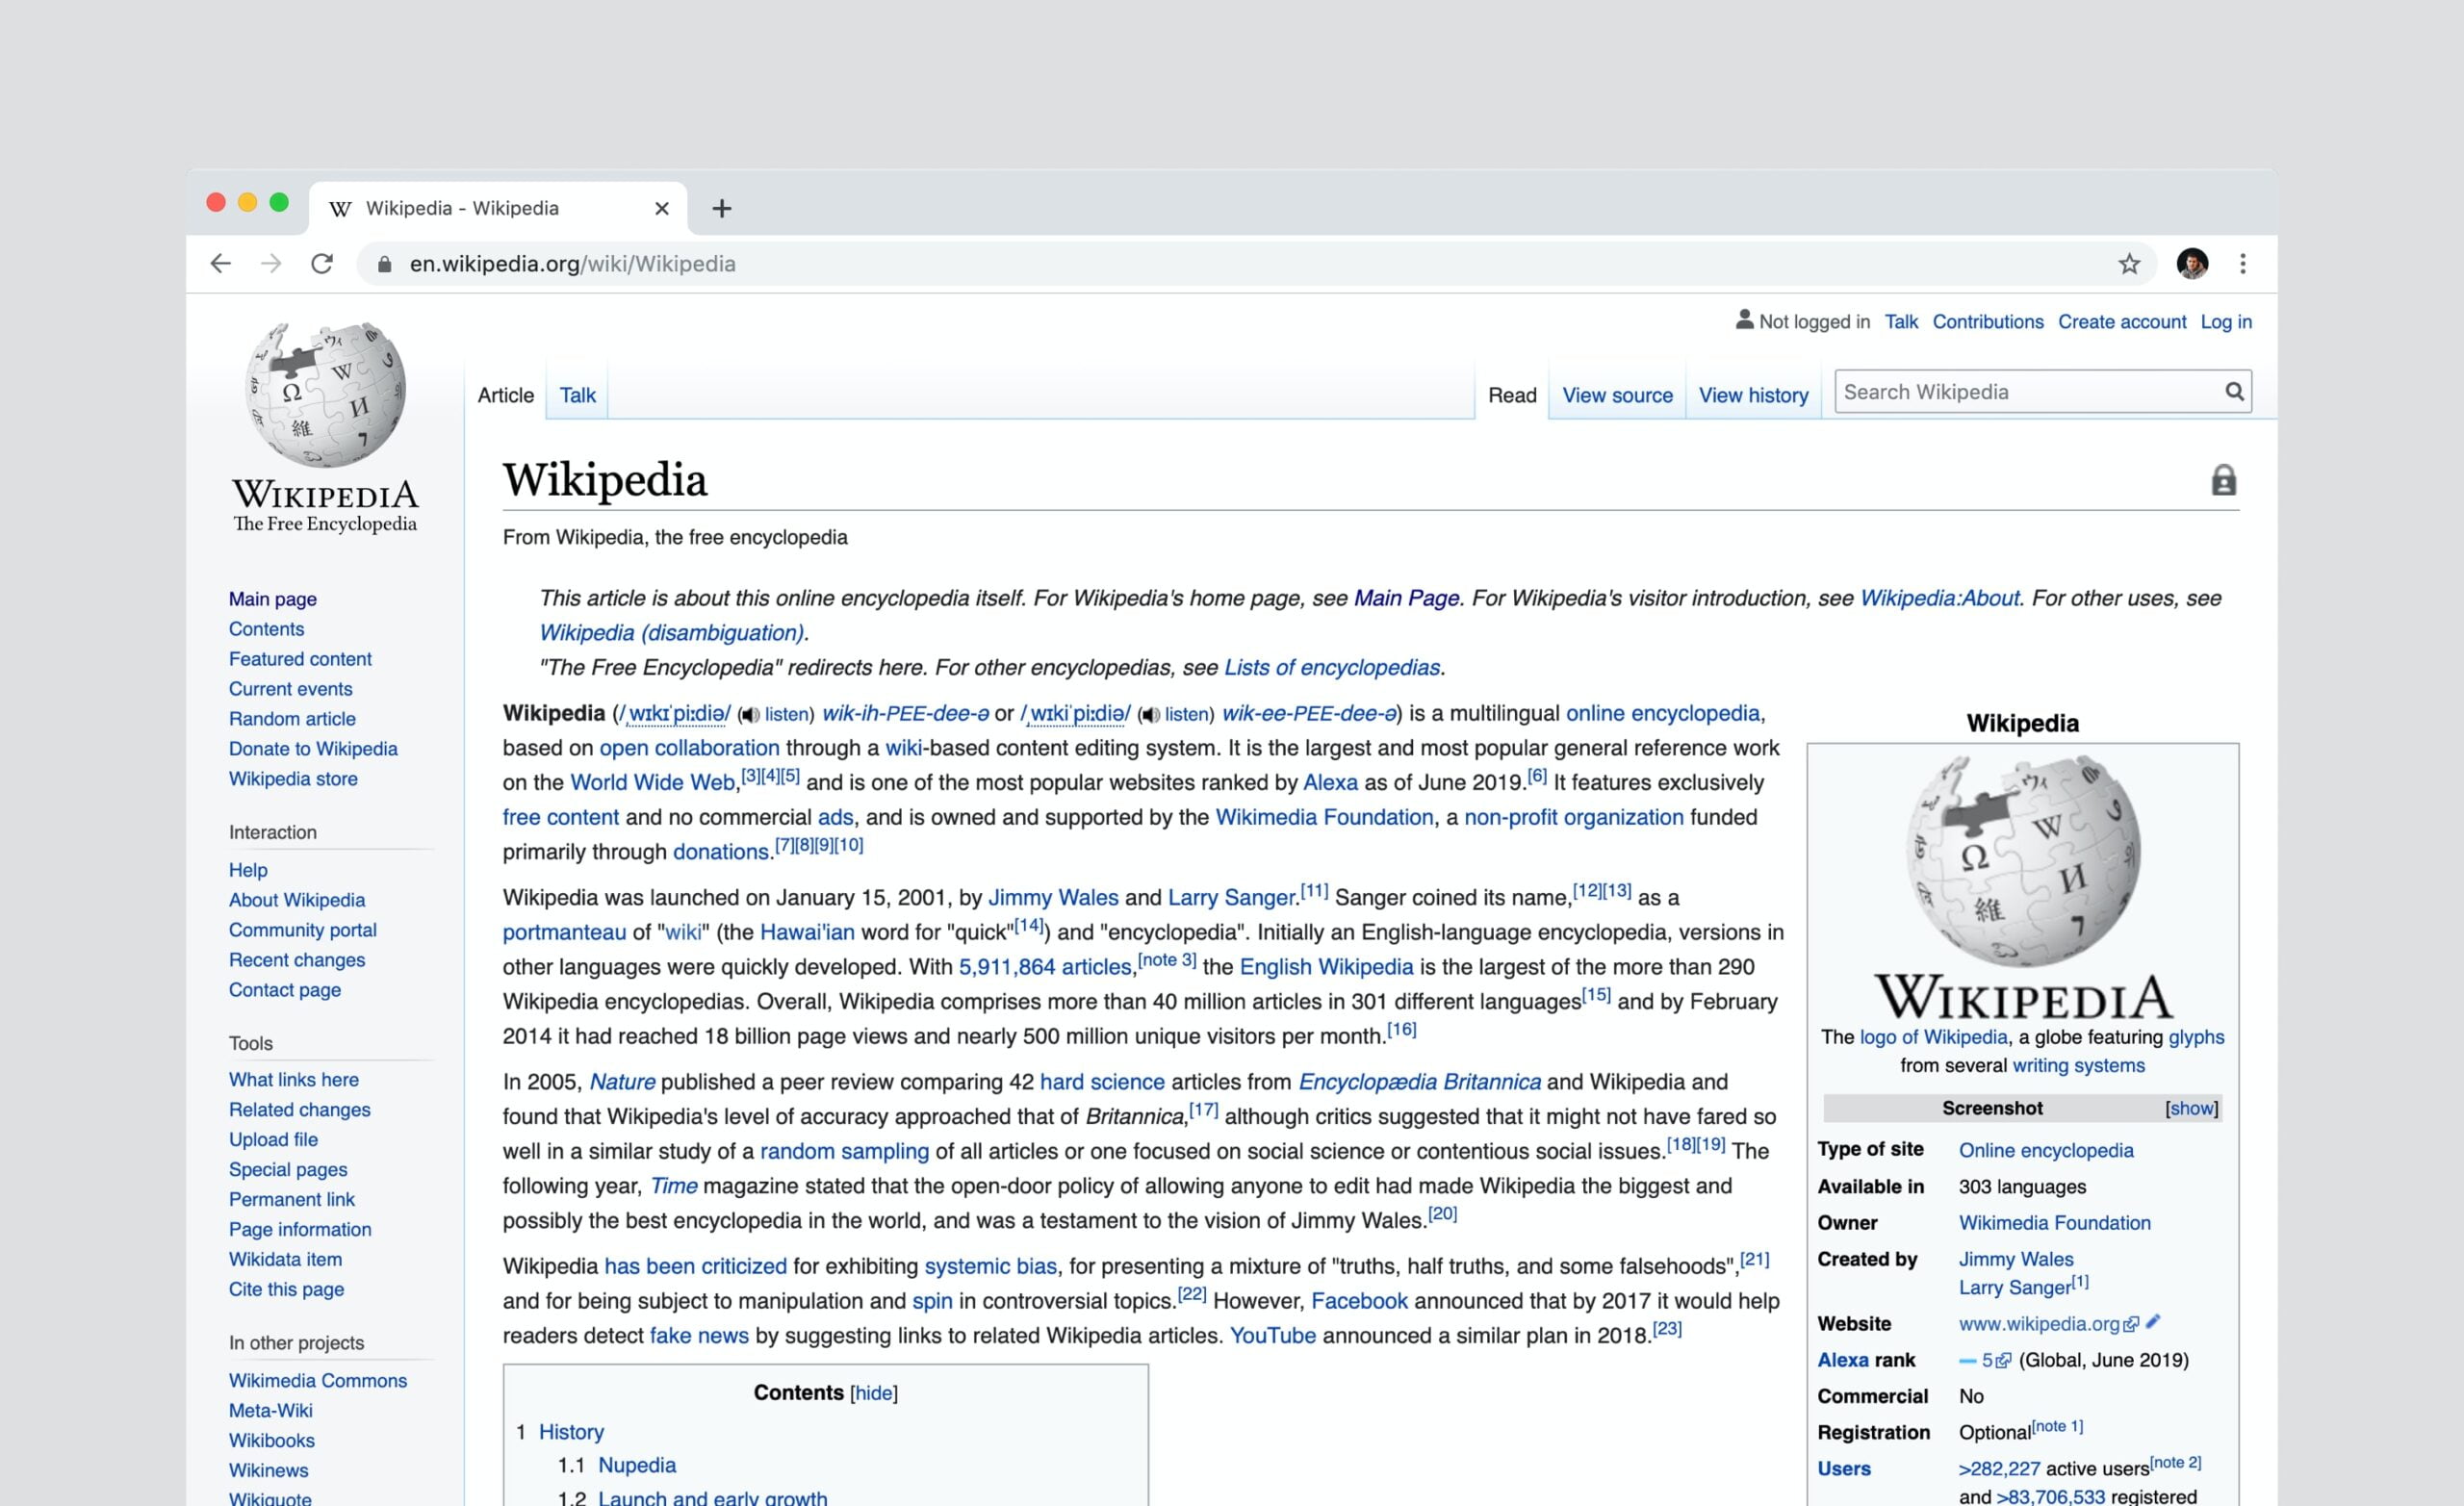 Wikipedia isn't yet ready to rely on AI for its text, but it's getting closer